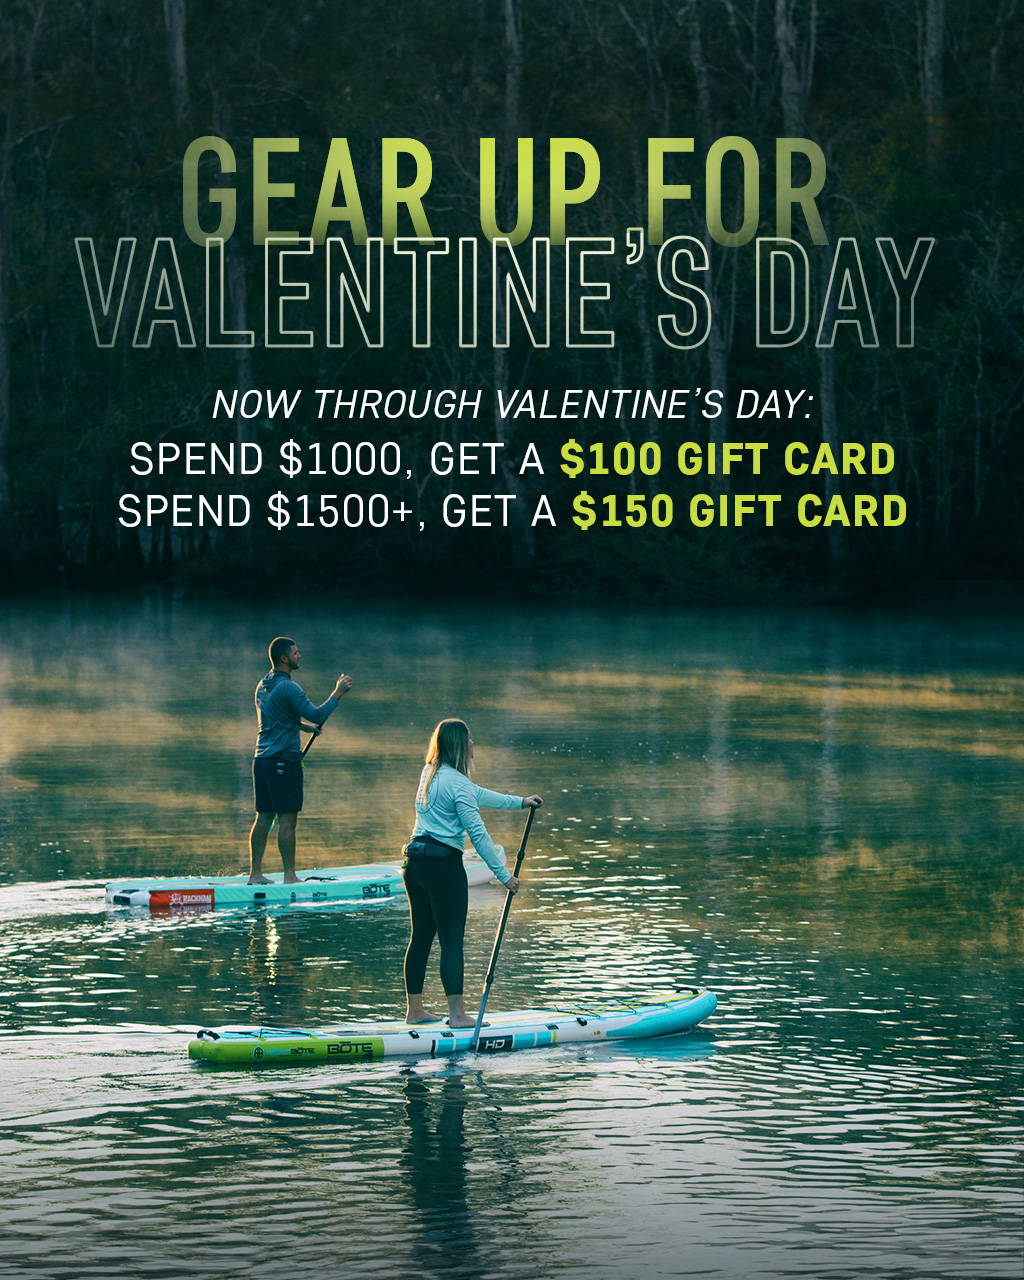 Gear Up for Valentine's Day